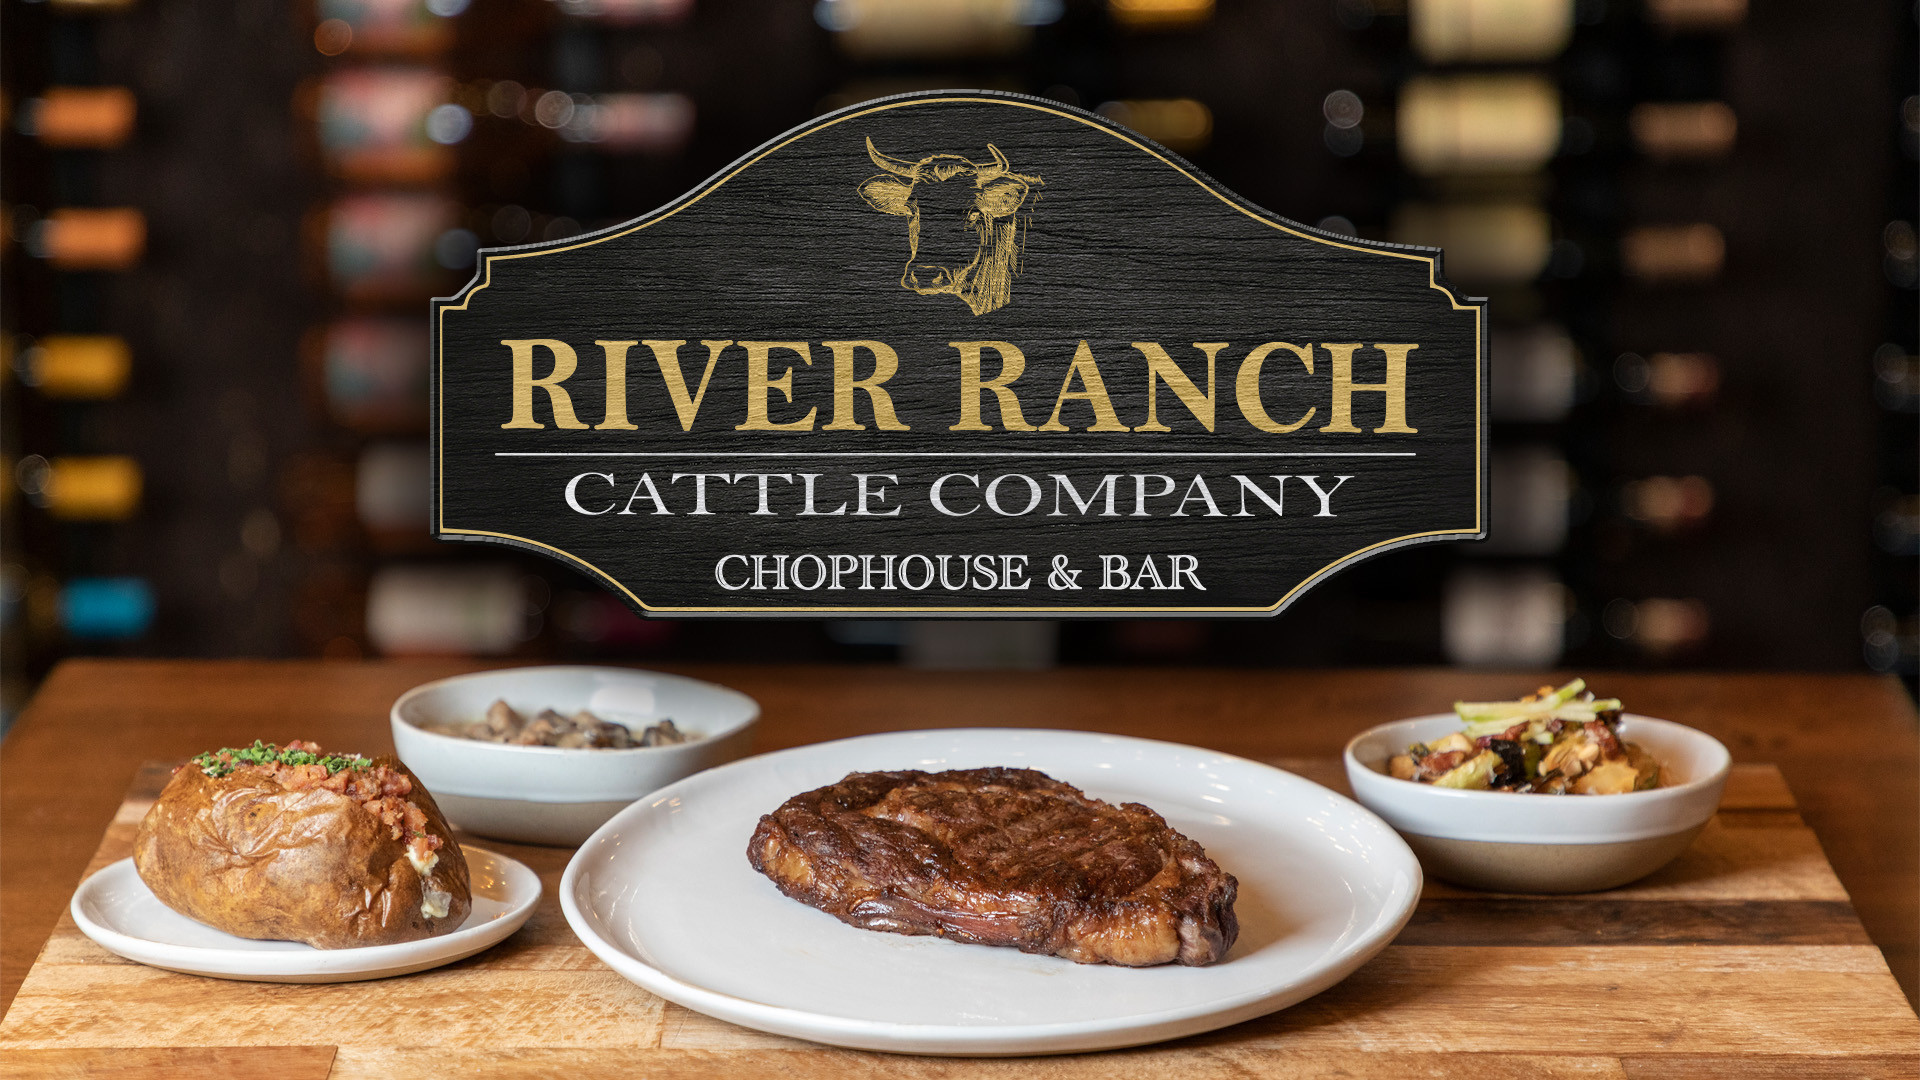 Westgate River Ranch Resort & Rodeo Debuts New Upscale Steakhouse –  River Ranch Cattle Company Chophouse & Bar